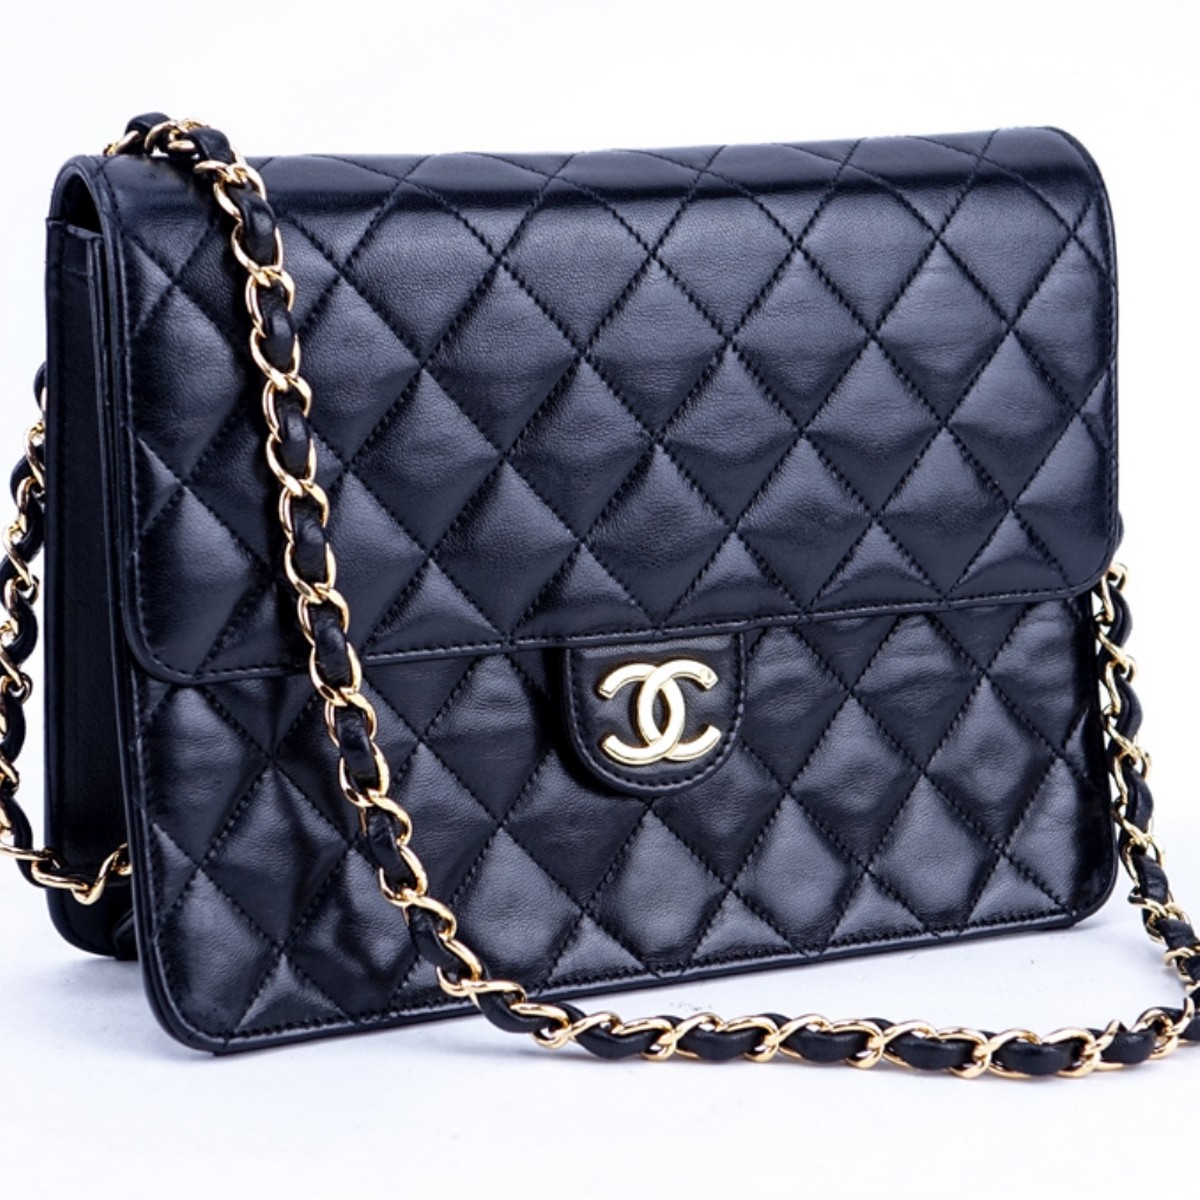 Chanel Black Quilted Leather Mademoiselle PM Bag